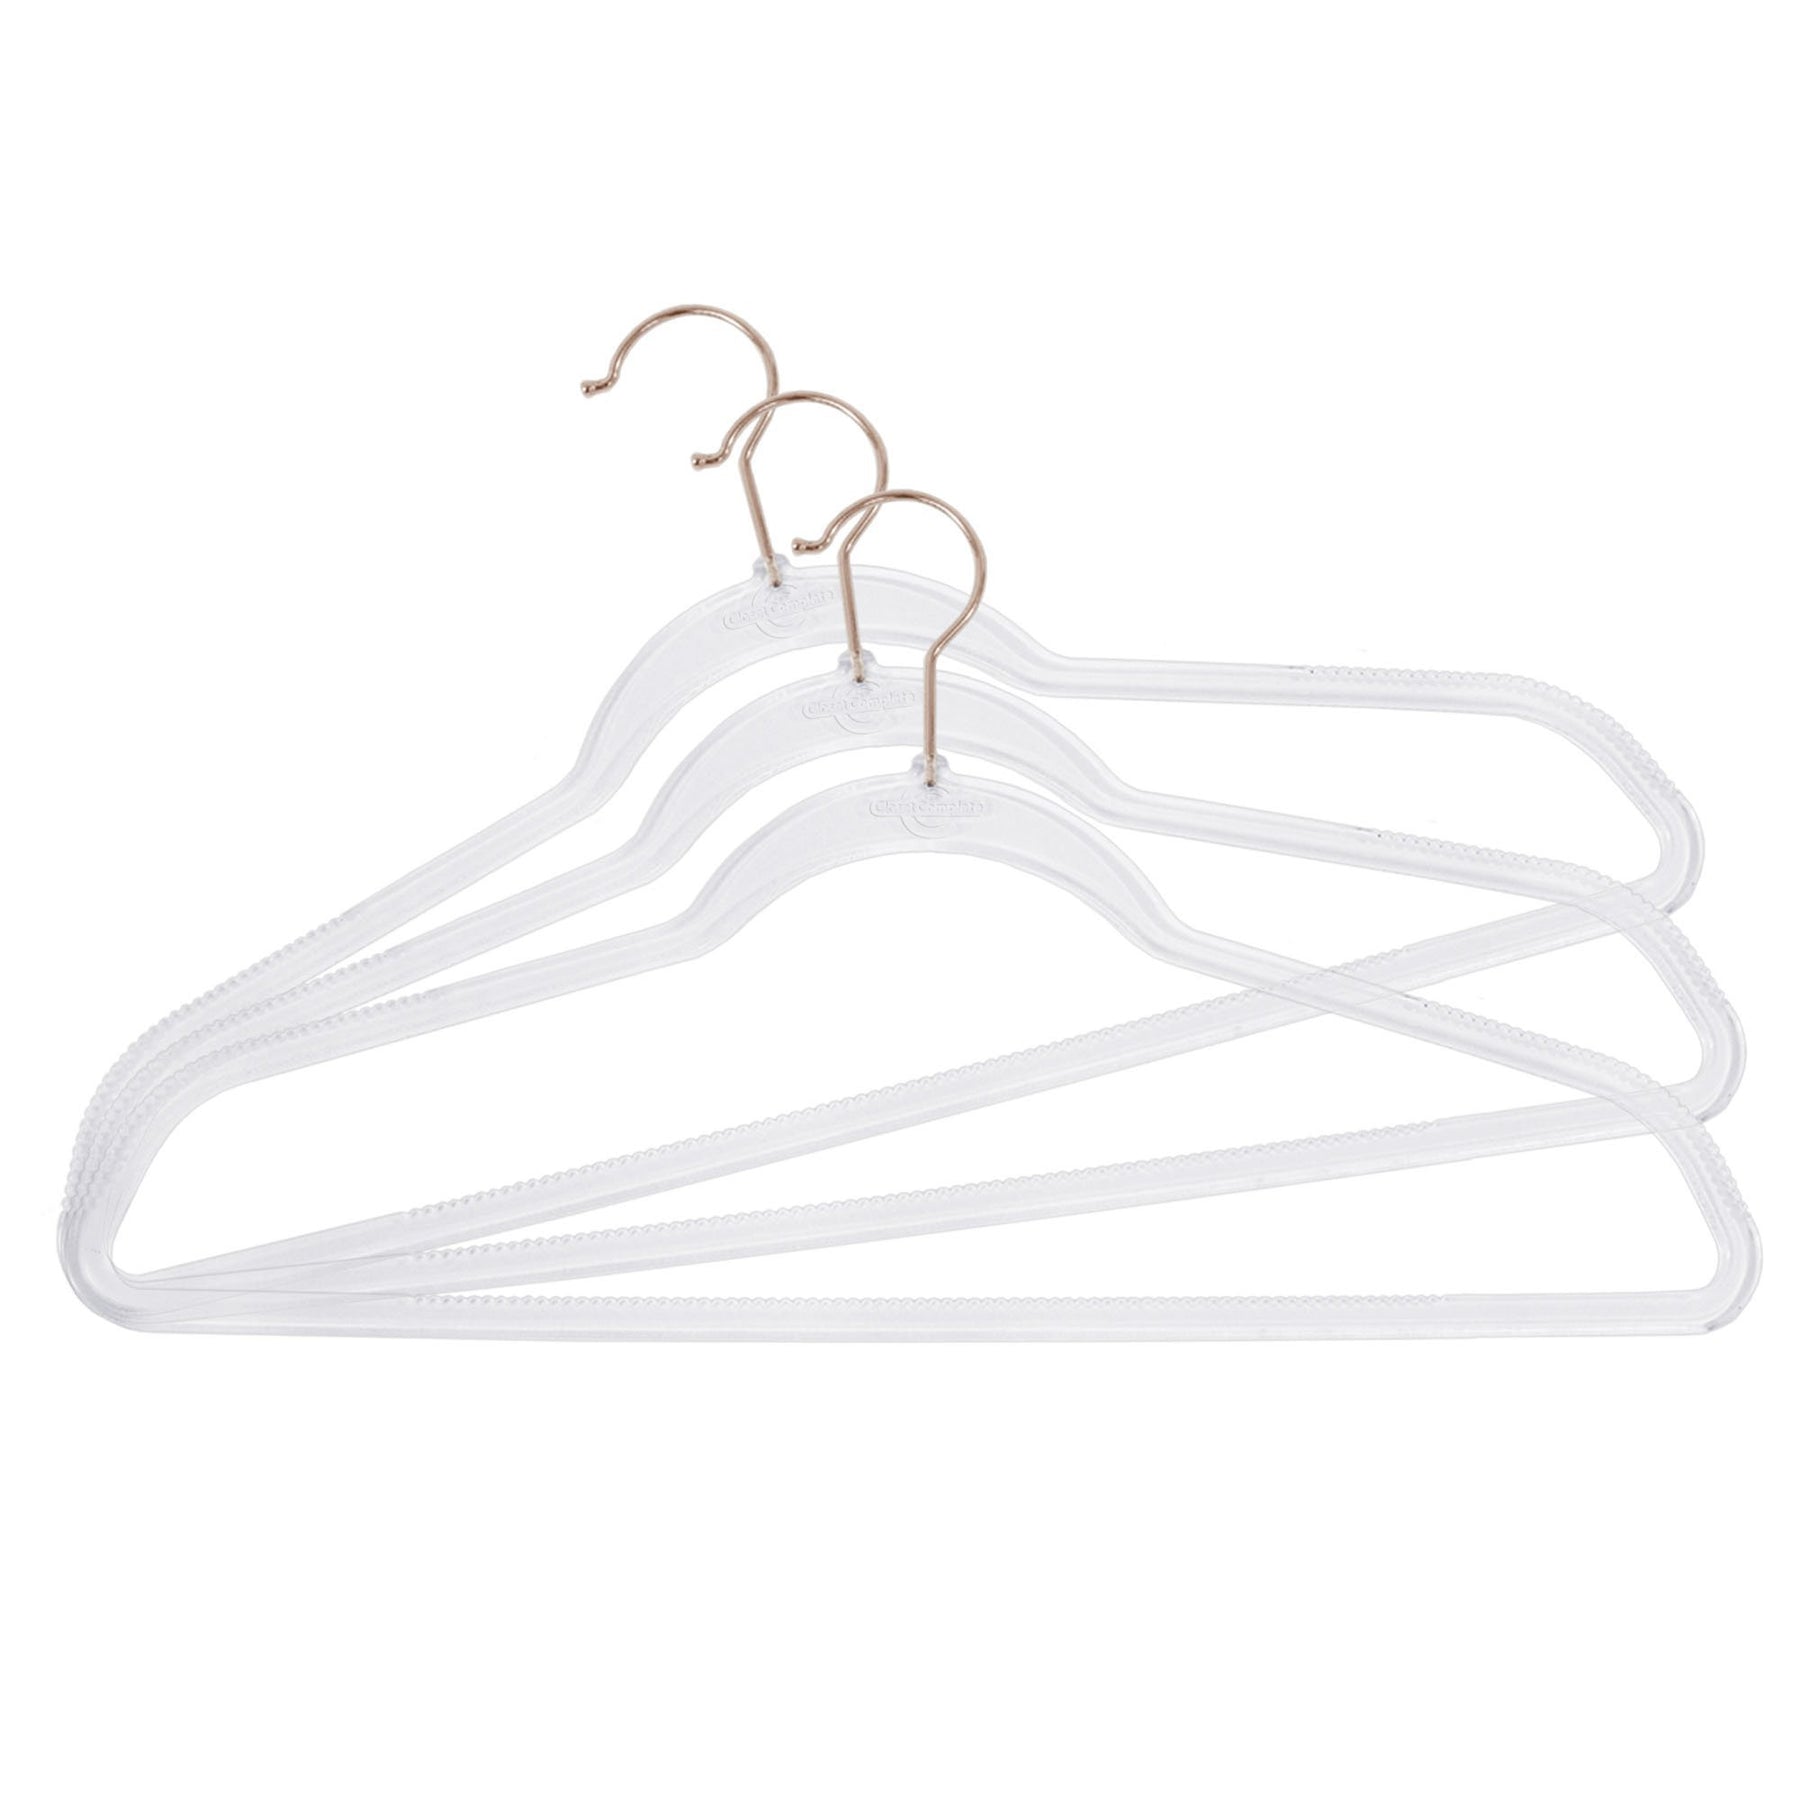 NEW EXCLUSIVE INNOVATION by Closet Complete: COMPLETELY CLEAR, Space  Saving, INVISIBLE HANGERS, Ultra-Thin ACRYLIC HANGERS